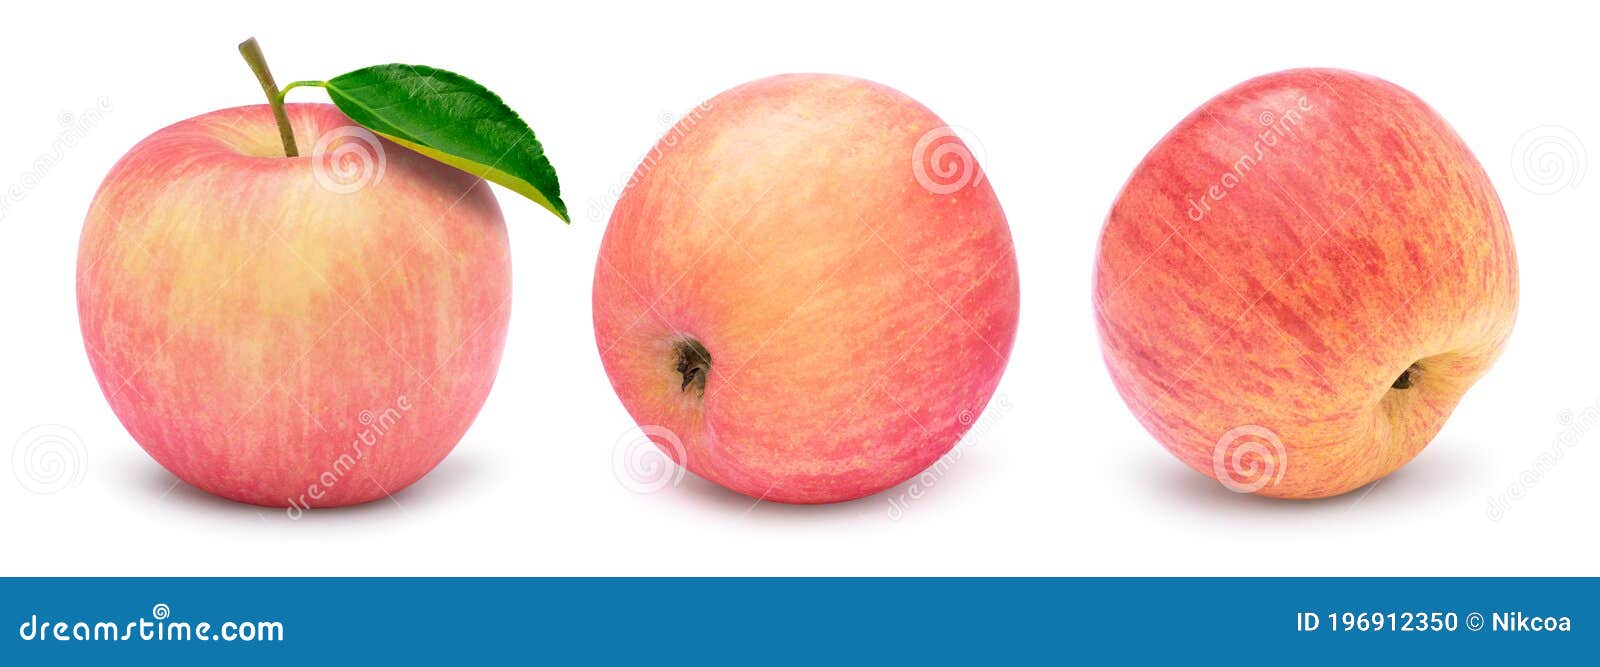 Pink Fuji Apples With Green Leaf Isolated On White Stock Photo